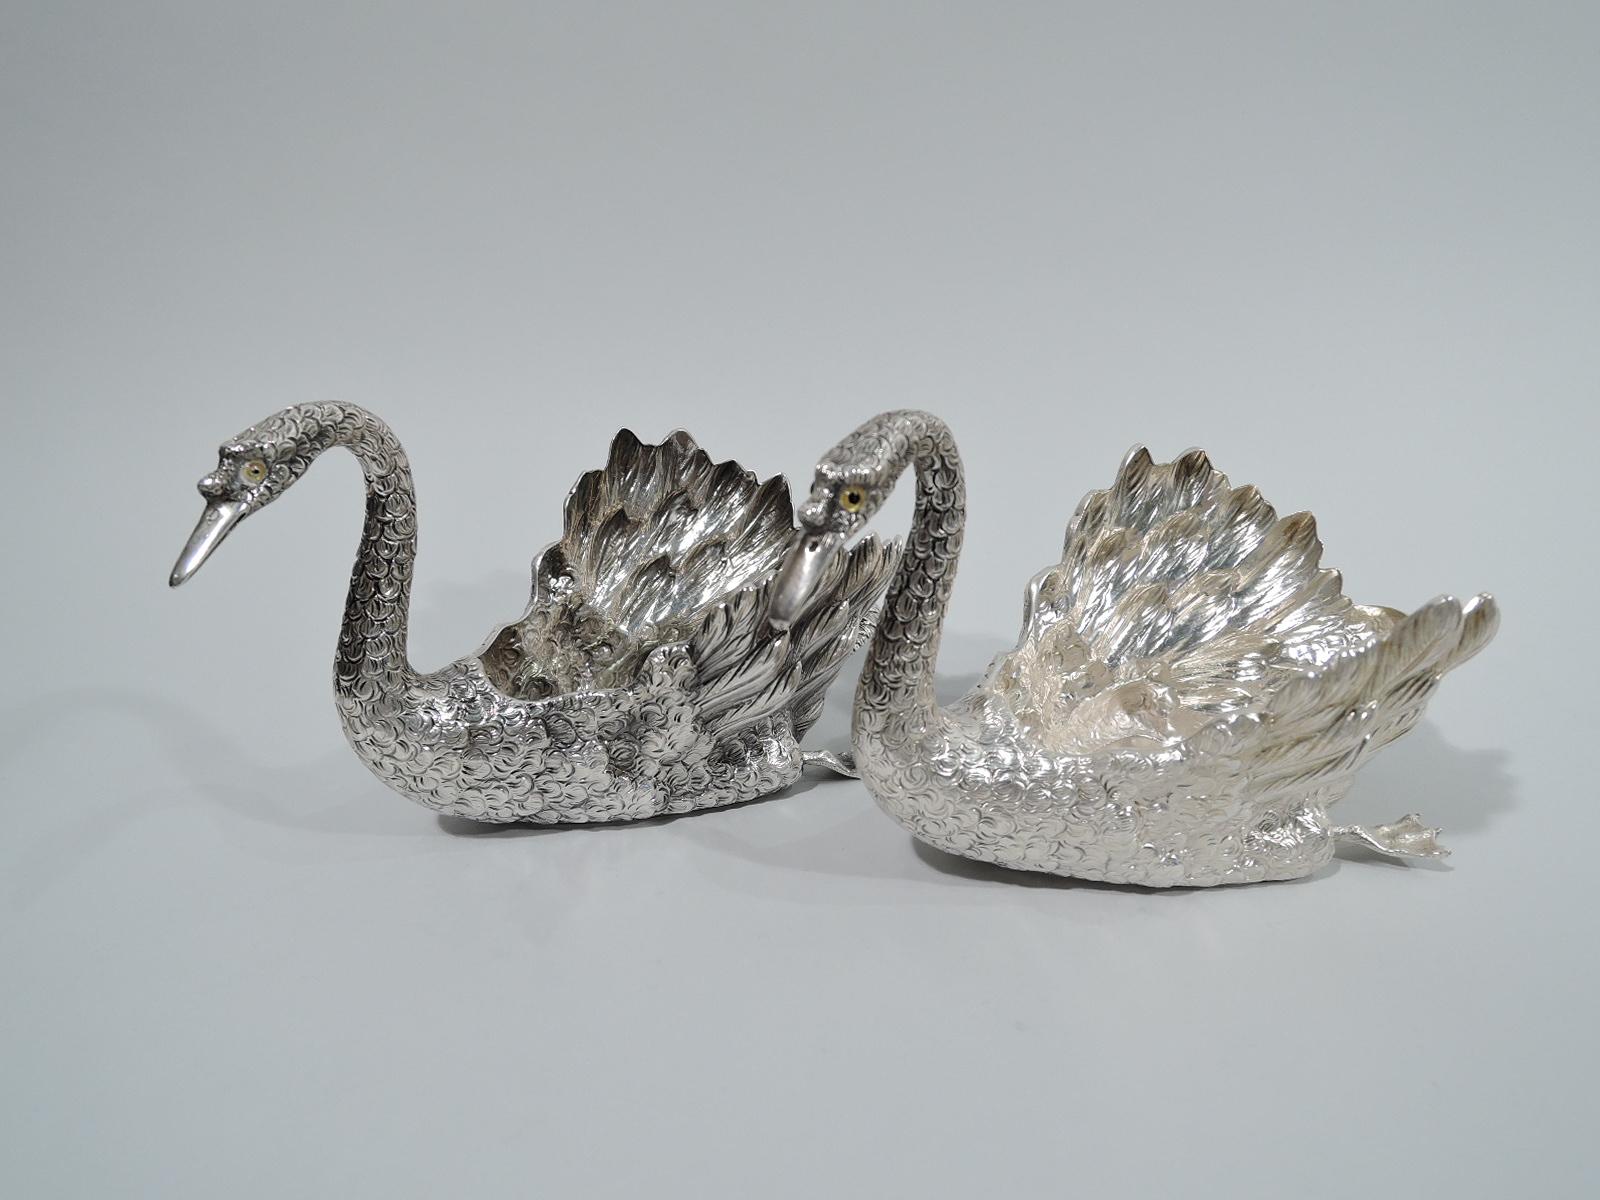 Pair of very desirable sterling silver swans. Made by Buccellati in Italy. Each: Hollow body with graceful scrolled neck, pointed bill, brown glass bead eyes, and paddling webbed feet. Realistic plumage from scaly to fluffy. Beautiful birds by the